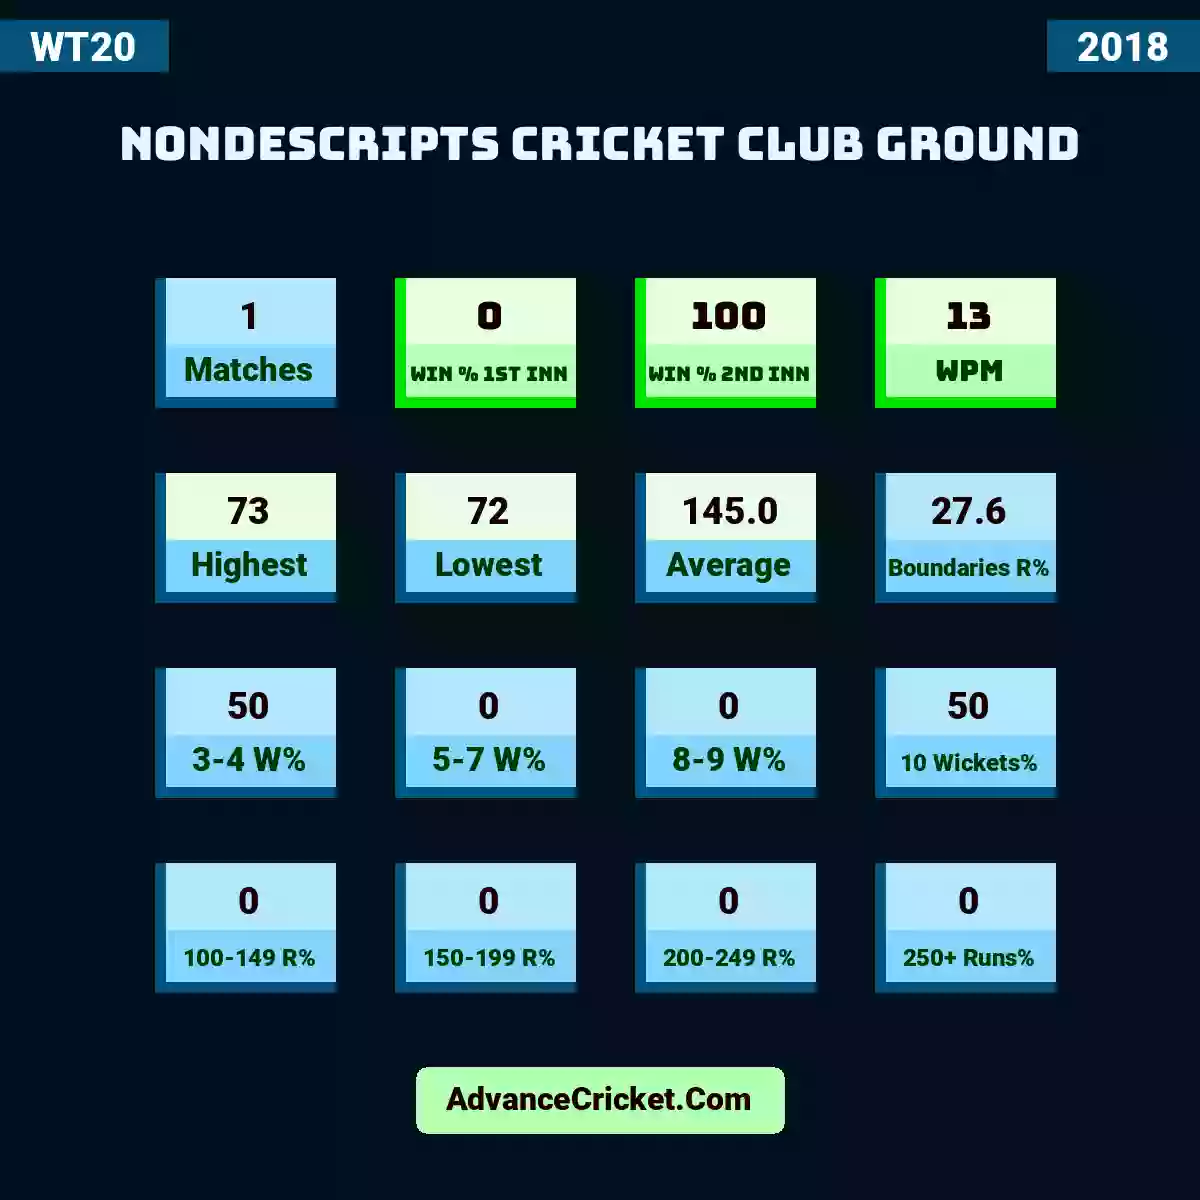 Image showing Nondescripts Cricket Club Ground with Matches: 1, Win % 1st Inn: 0, Win % 2nd Inn: 100, WPM: 13, Highest: 73, Lowest: 72, Average: 145.0, Boundaries R%: 27.6, 3-4 W%: 50, 5-7 W%: 0, 8-9 W%: 0, 10 Wickets%: 50, 100-149 R%: 0, 150-199 R%: 0, 200-249 R%: 0, 250+ Runs%: 0.